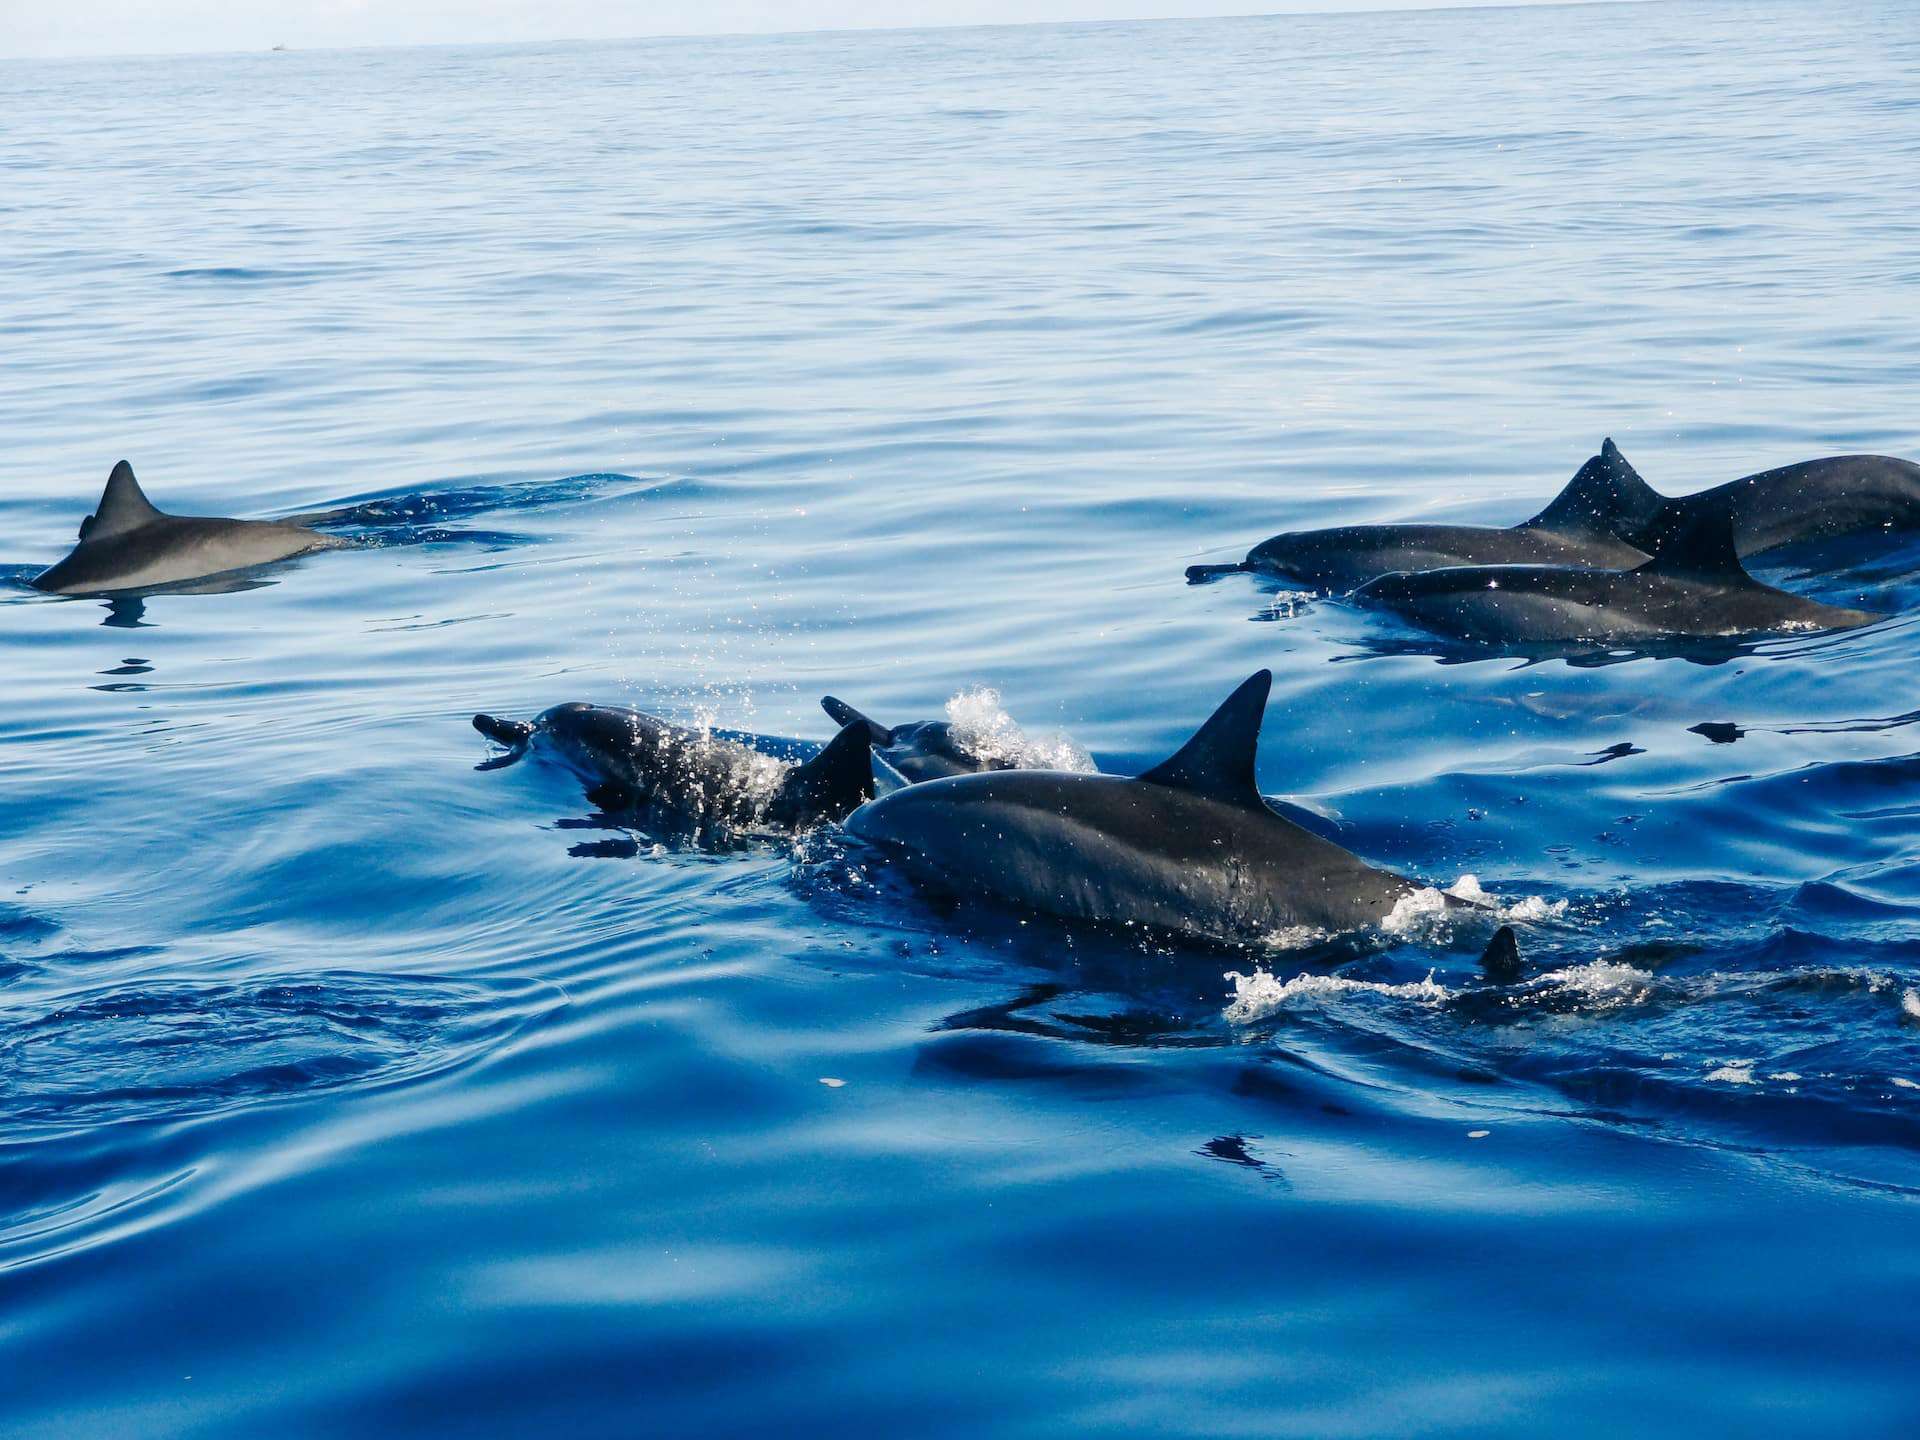 a pod of dolphins